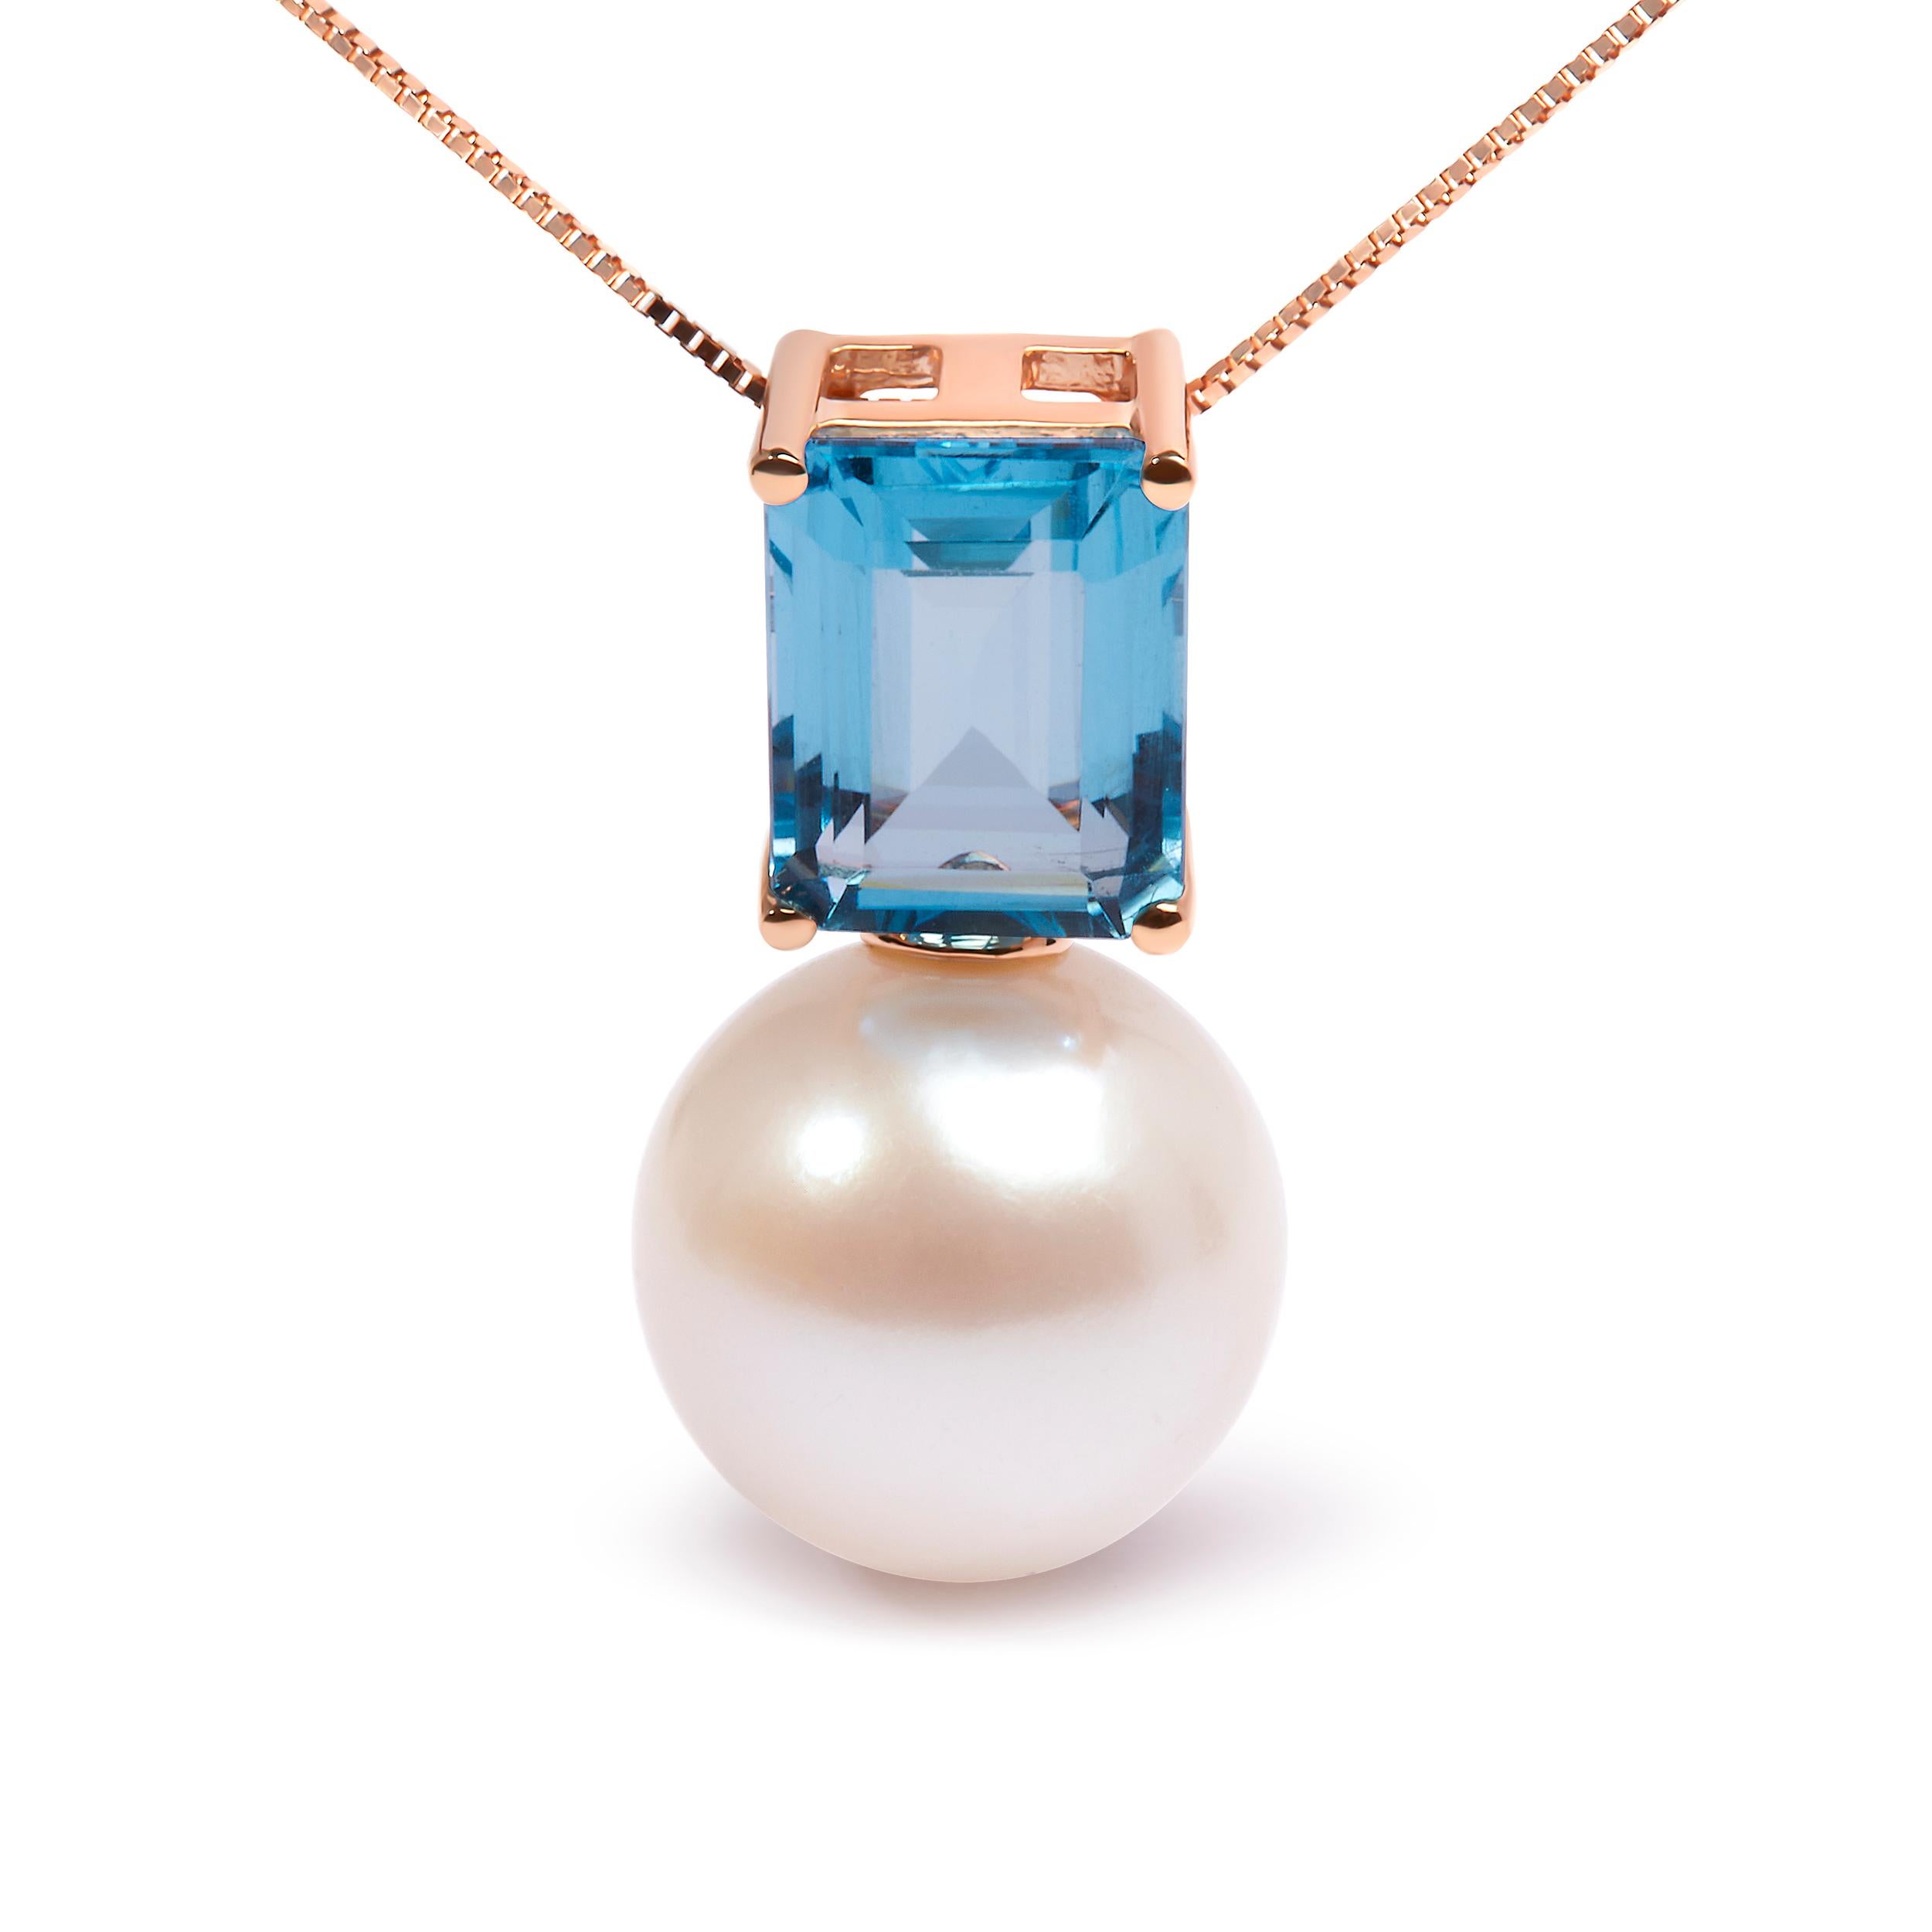 Indulge in the ethereal beauty of this exquisite pendant necklace. Crafted in 14K rose gold, it features a captivating 11mm freshwater pearl, exuding a high-luster glow. Adorning this pearl is a mesmerizing 9x7mm octagon Swiss blue topaz, weighing